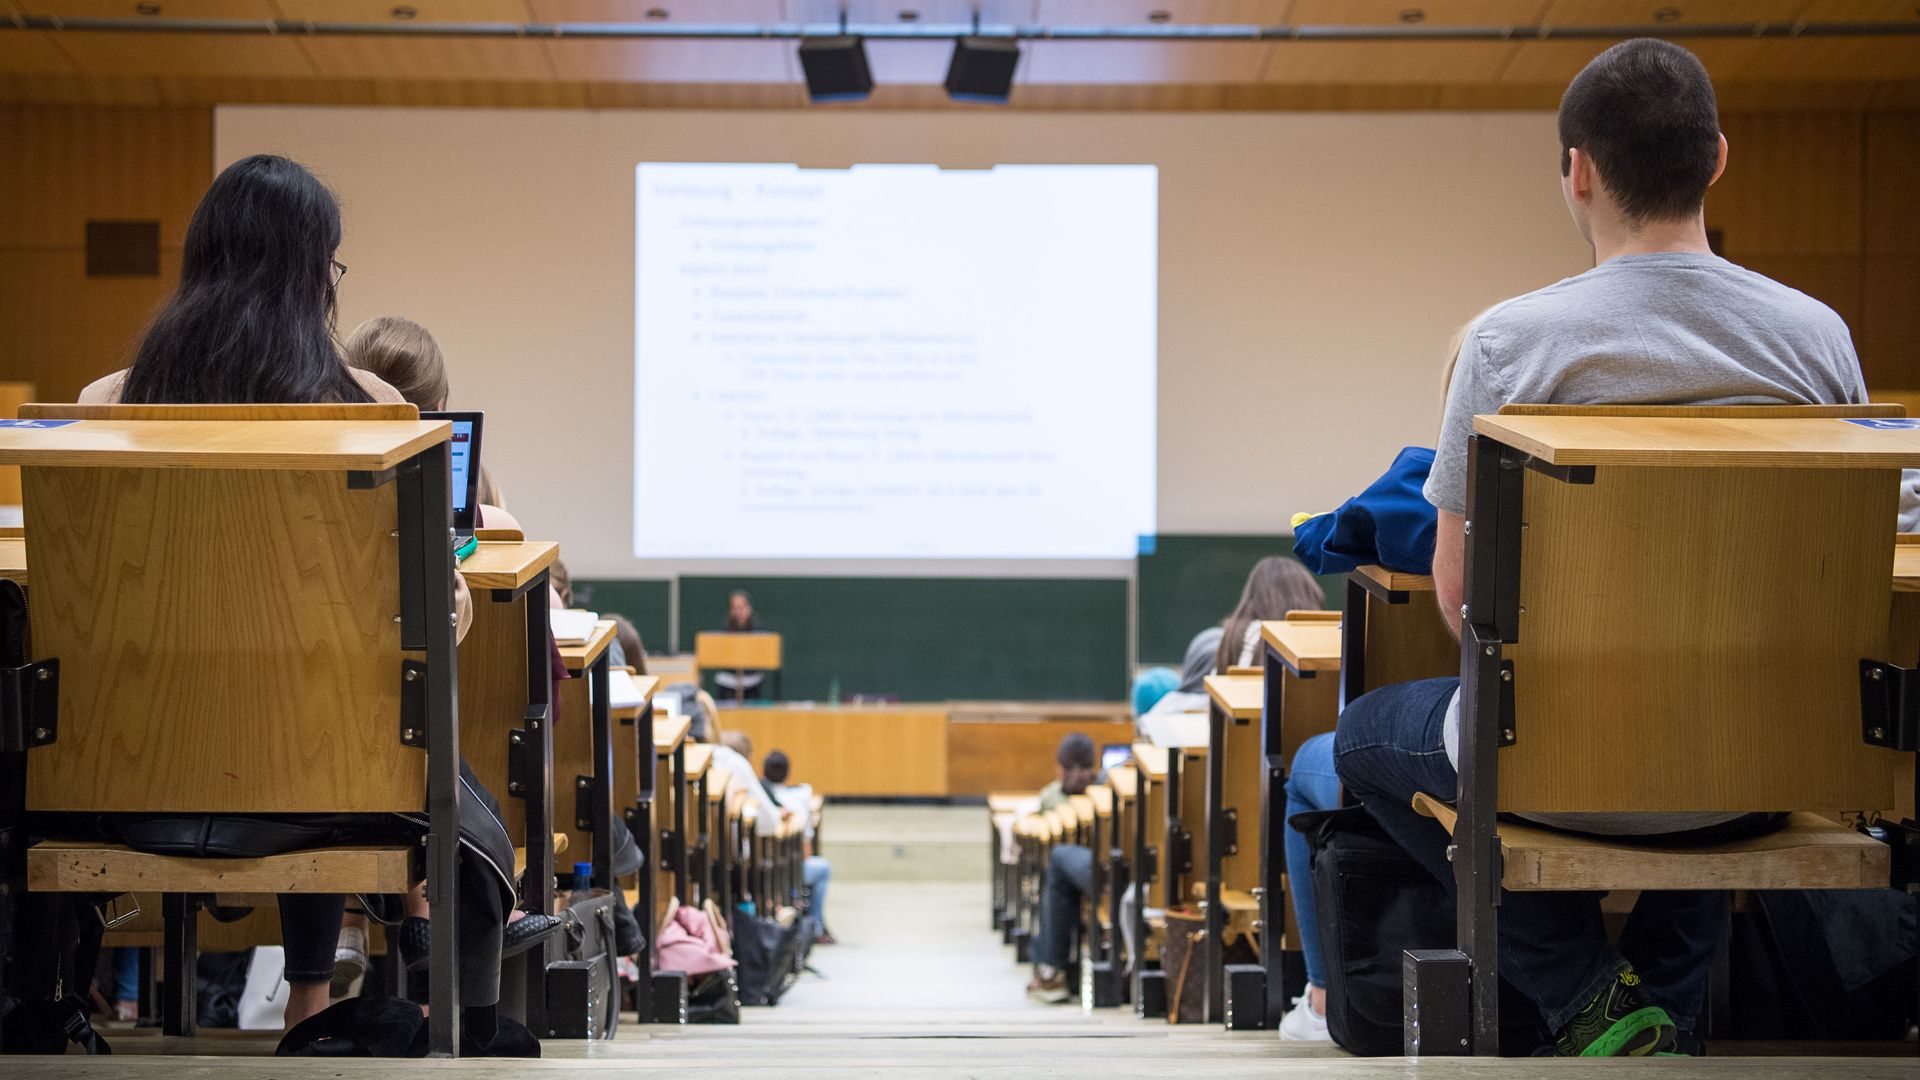 A photo of a full lecture hall from the back